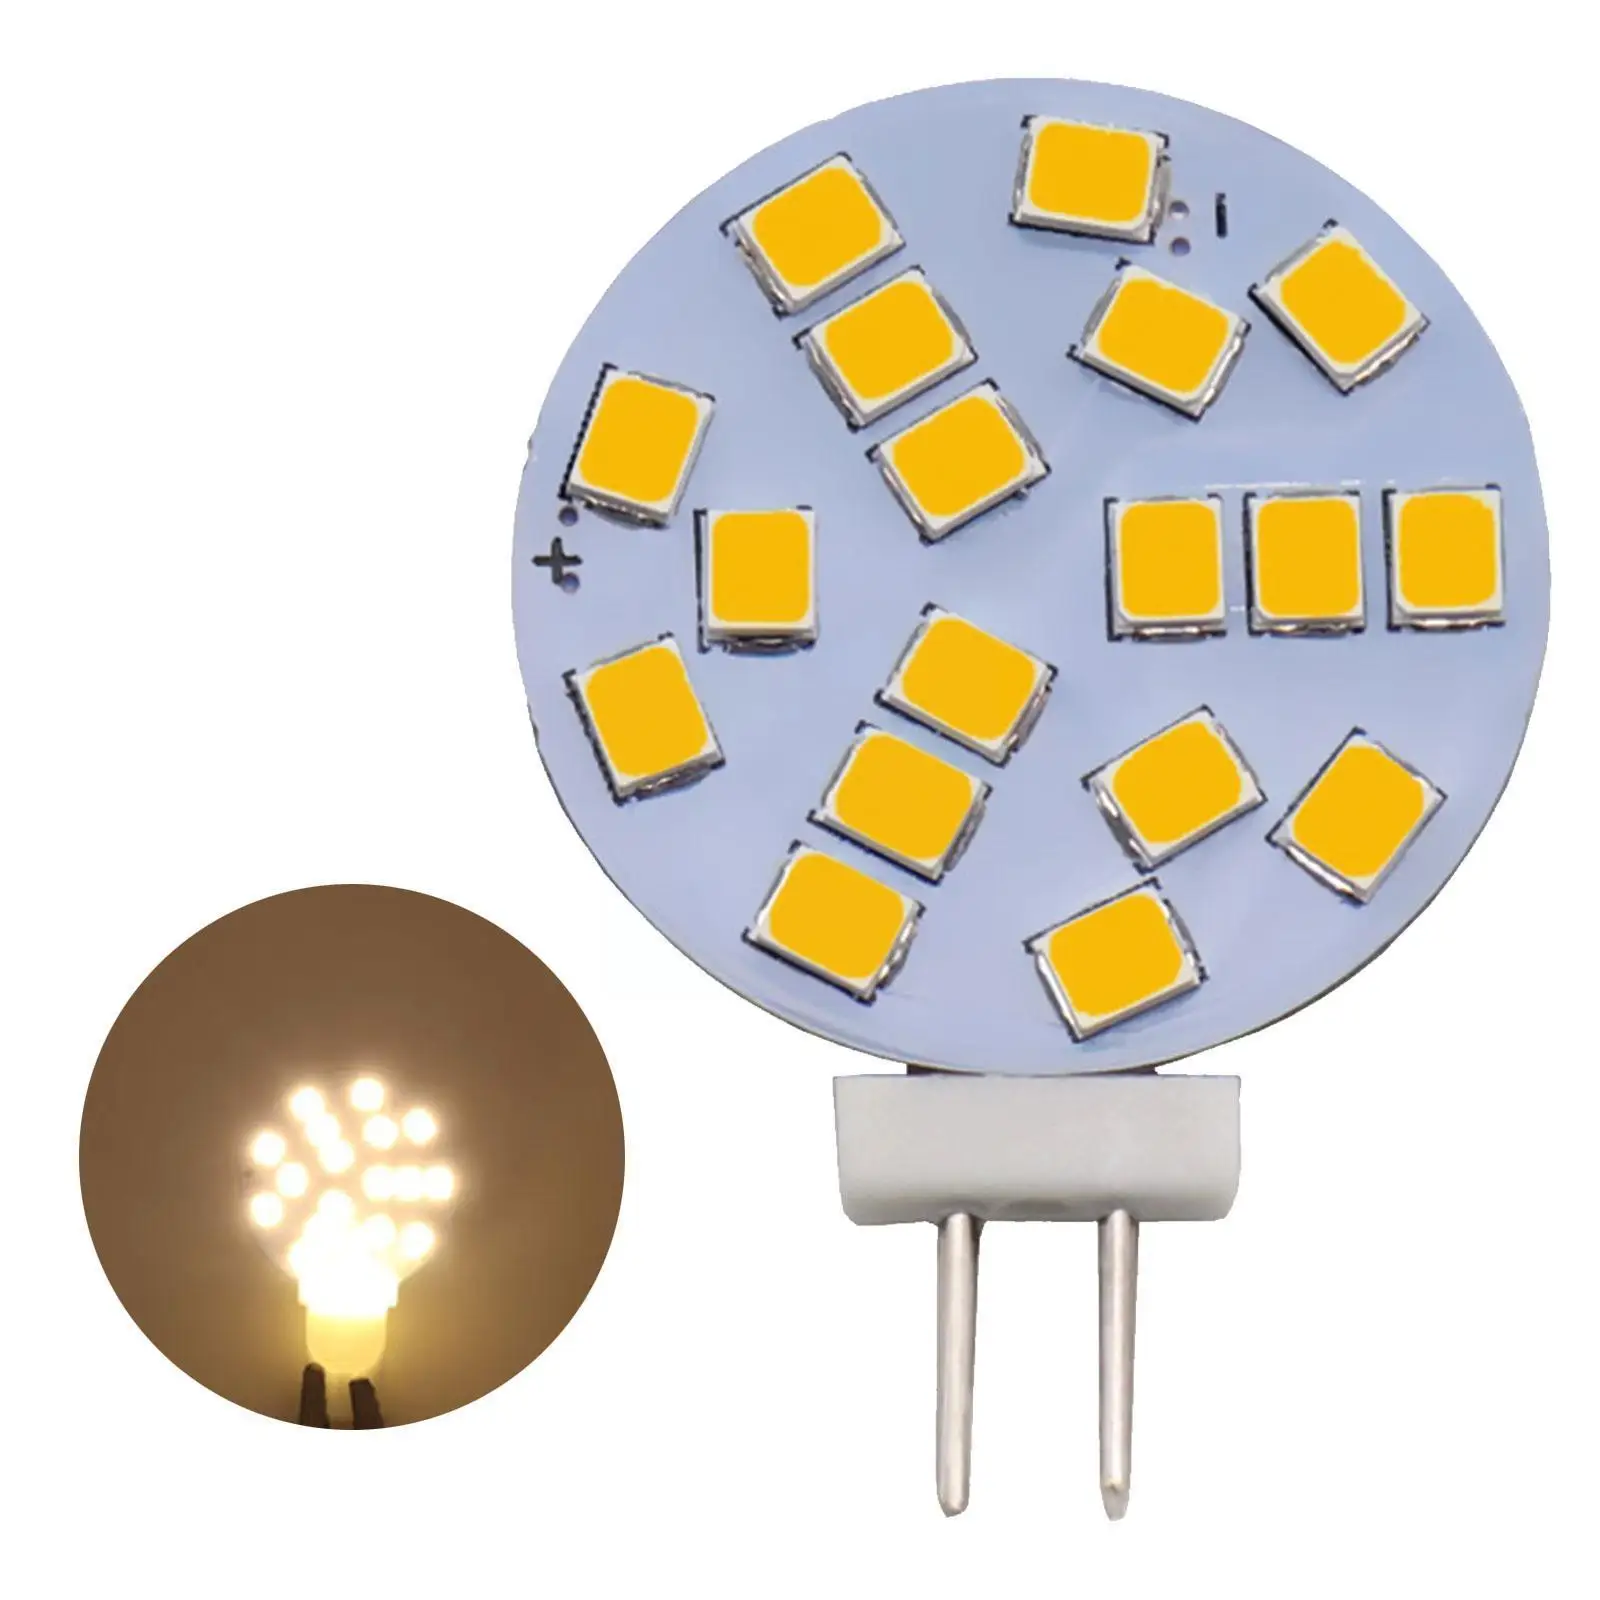 

LED Lamp Bulb G4 180 Degree DC12V 5050 SMD 4.8W 2.4W Halogen Cold 1.2W White Lamp Replace Warm 1.8W Light R4P6